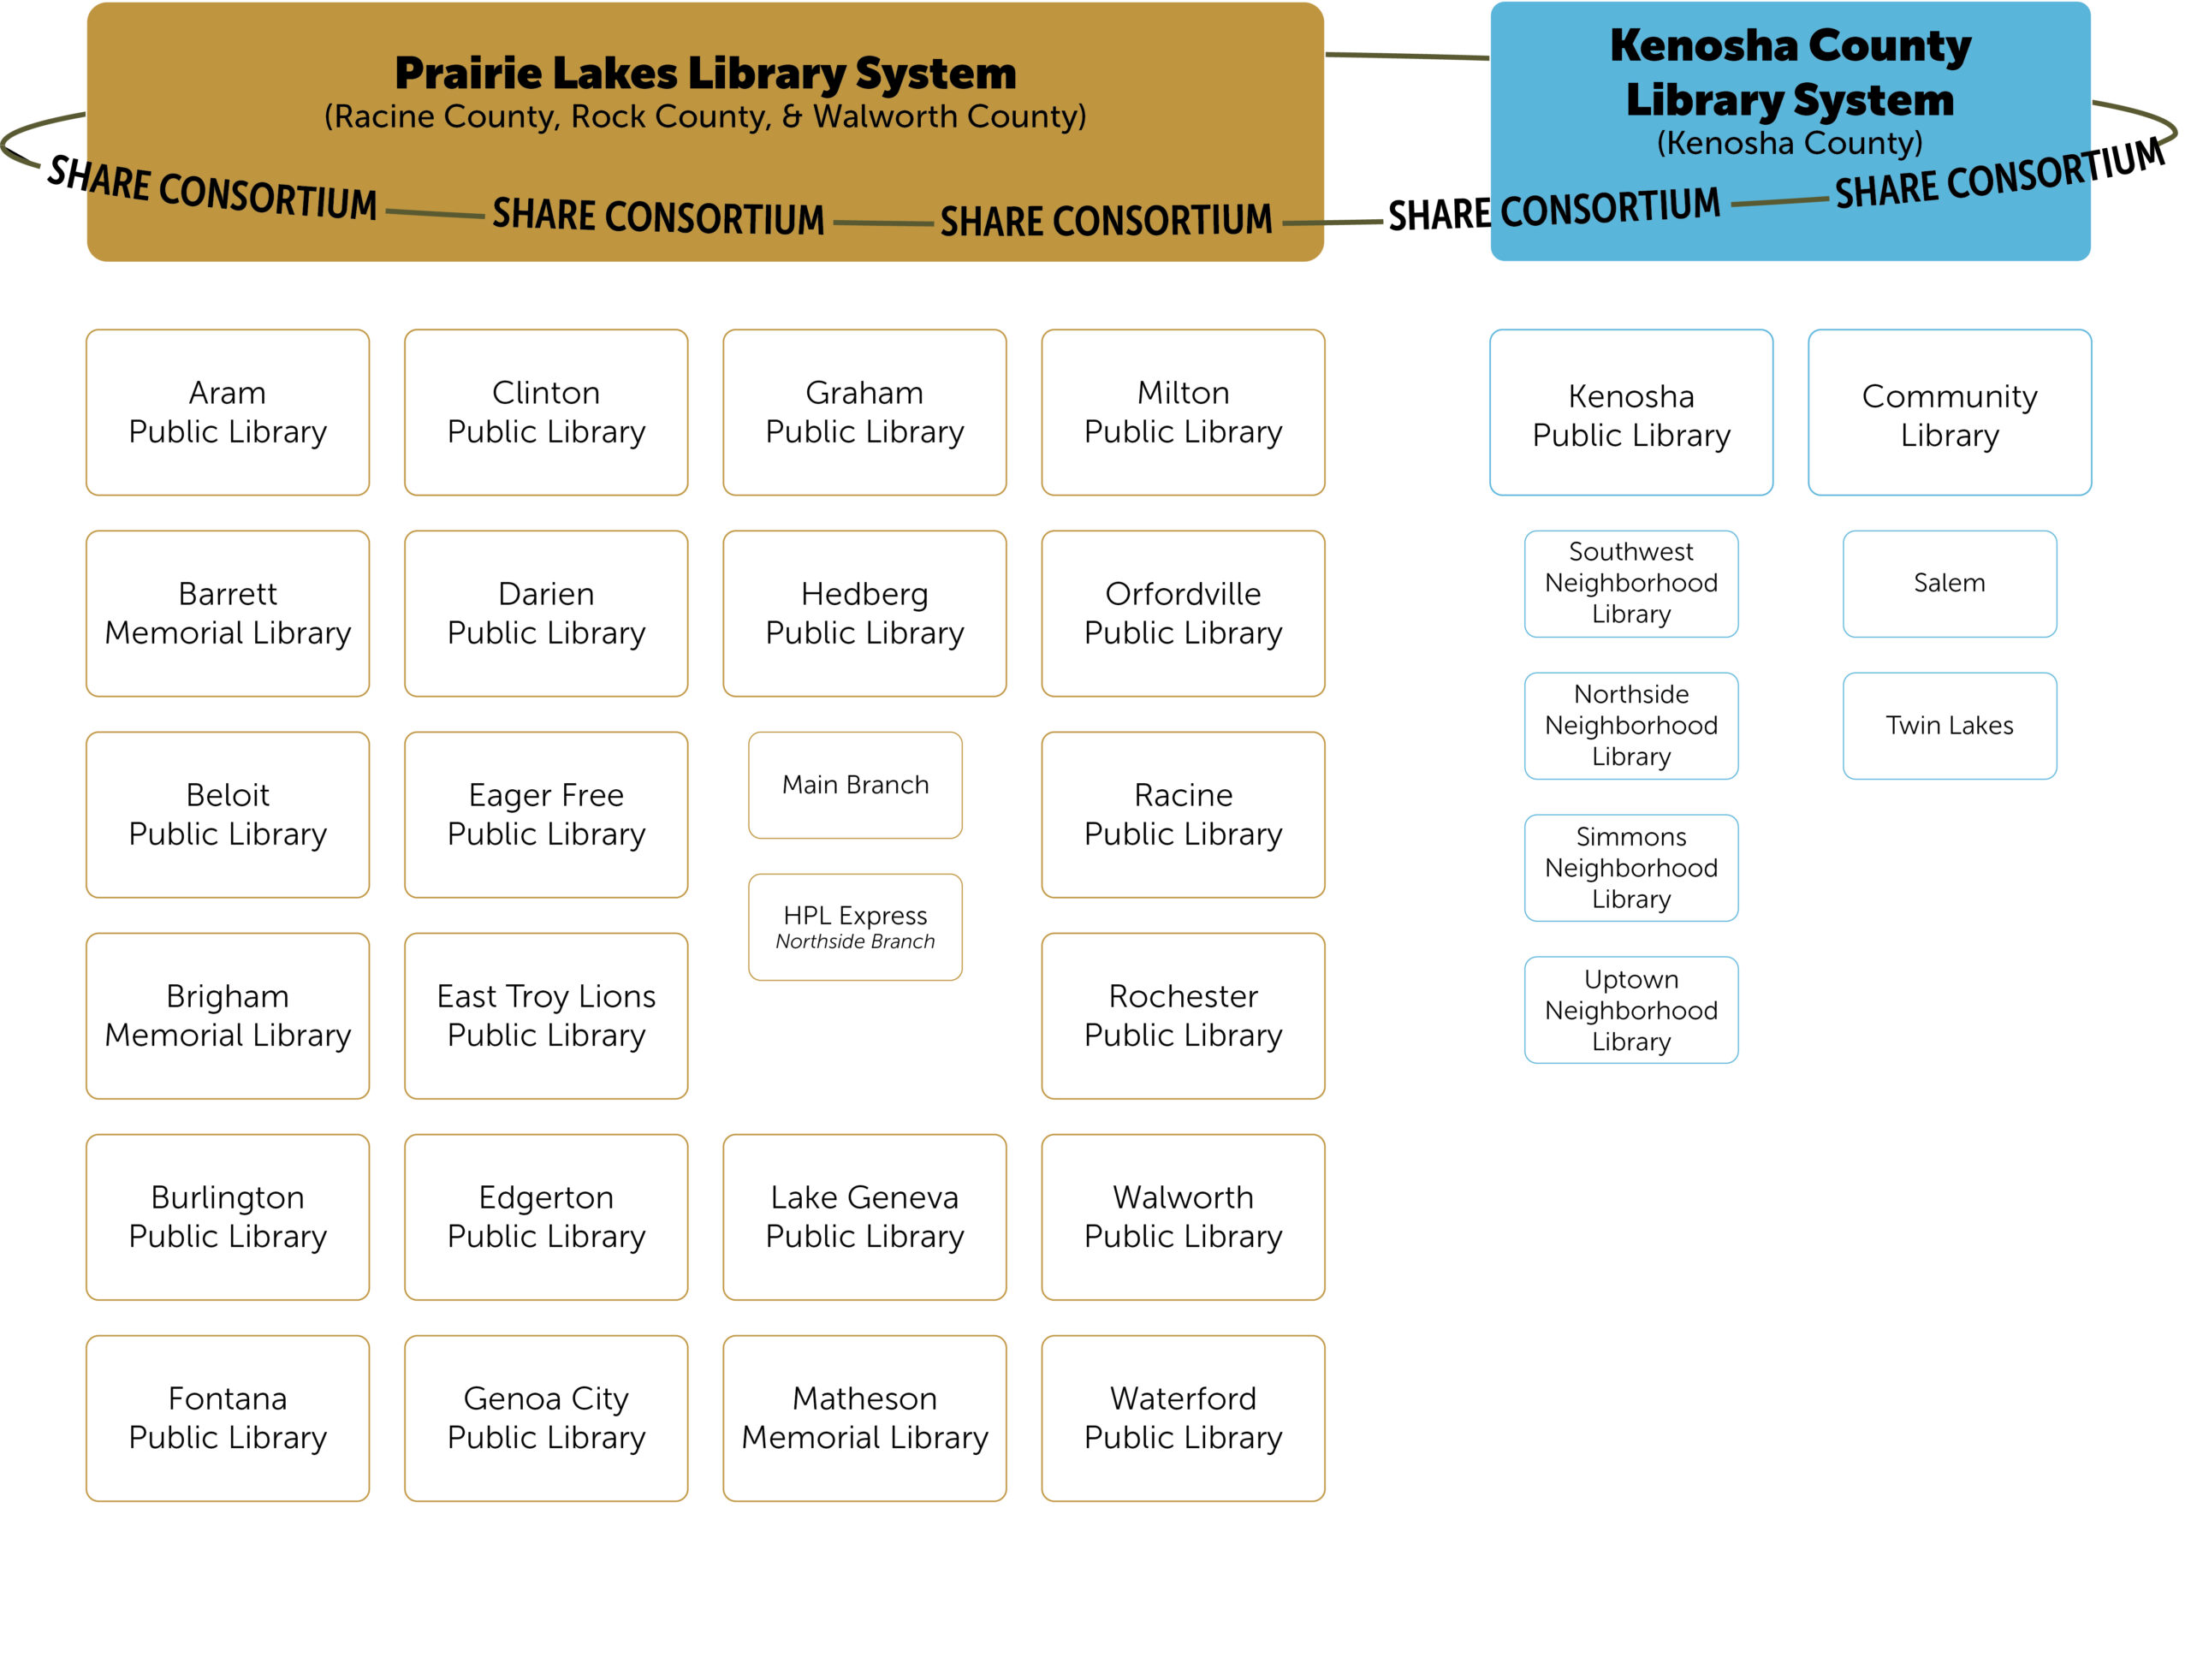 Diagram illustrating the members of SHARE by showing the two member systems: Prairie Lakes and Kenosha County, and each system's members.